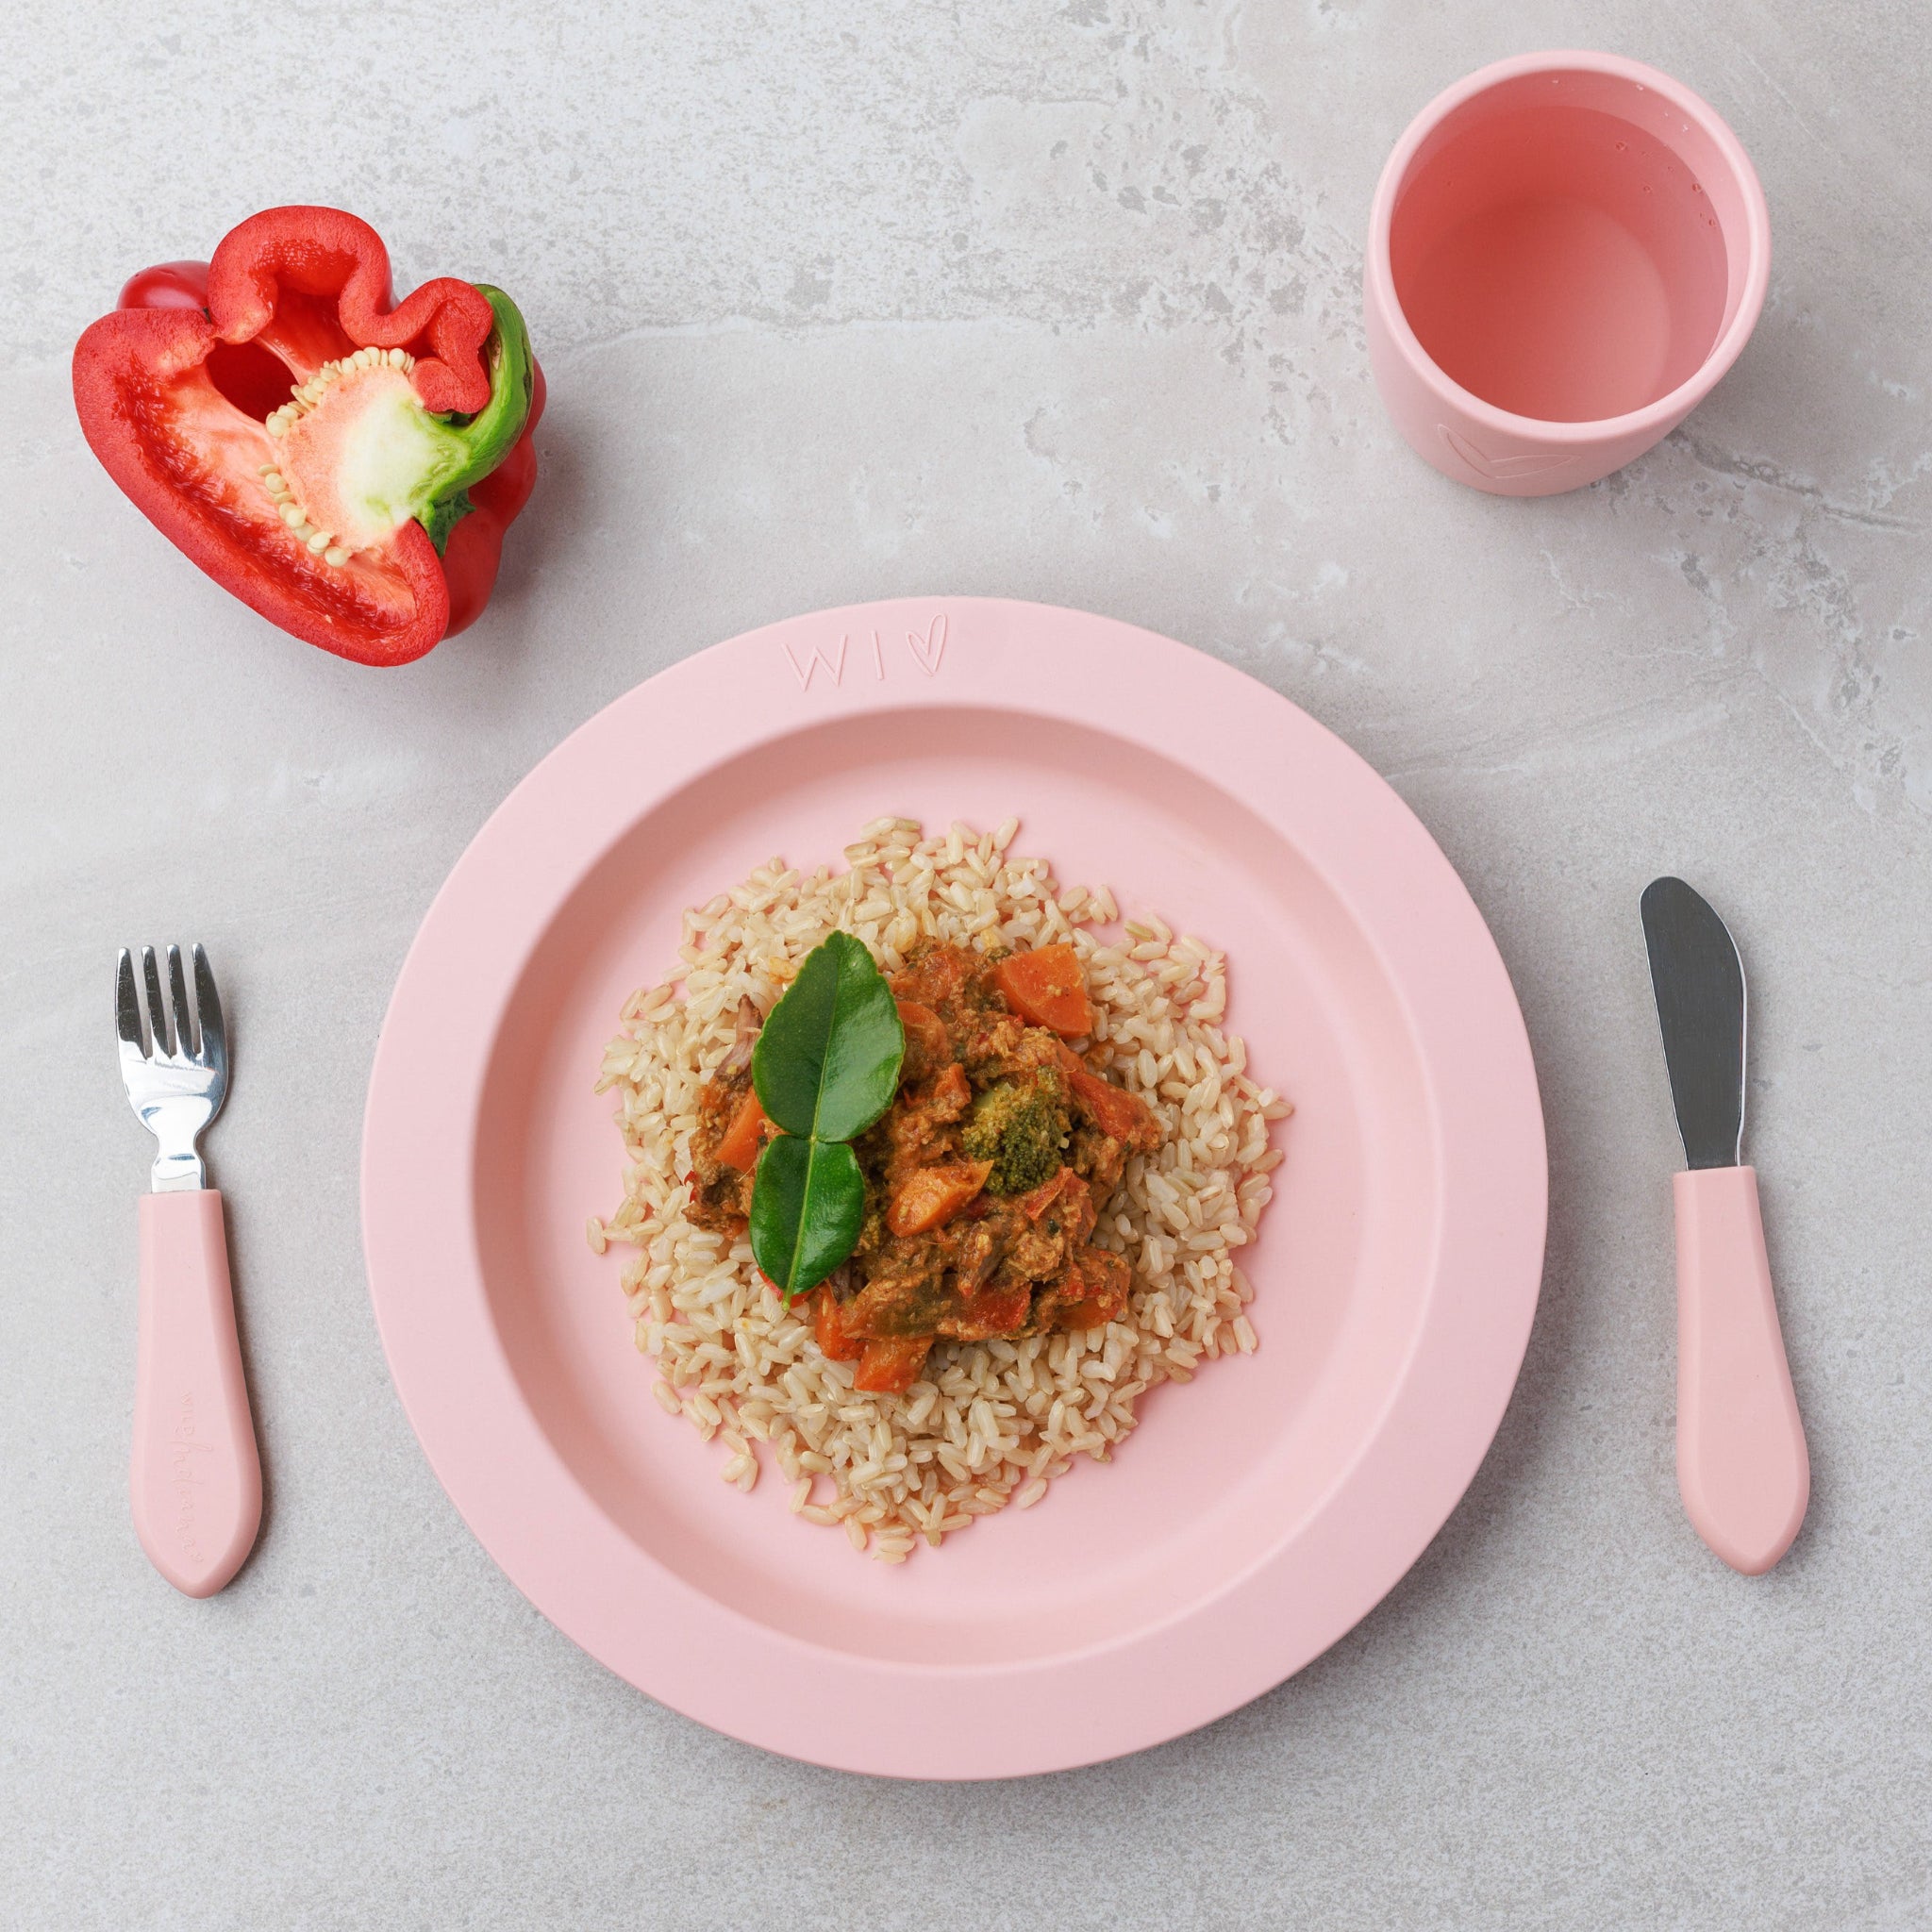 A plate of slow cooked beef rendang with organic brown rice from Audrey and Alfie's Bowl Range